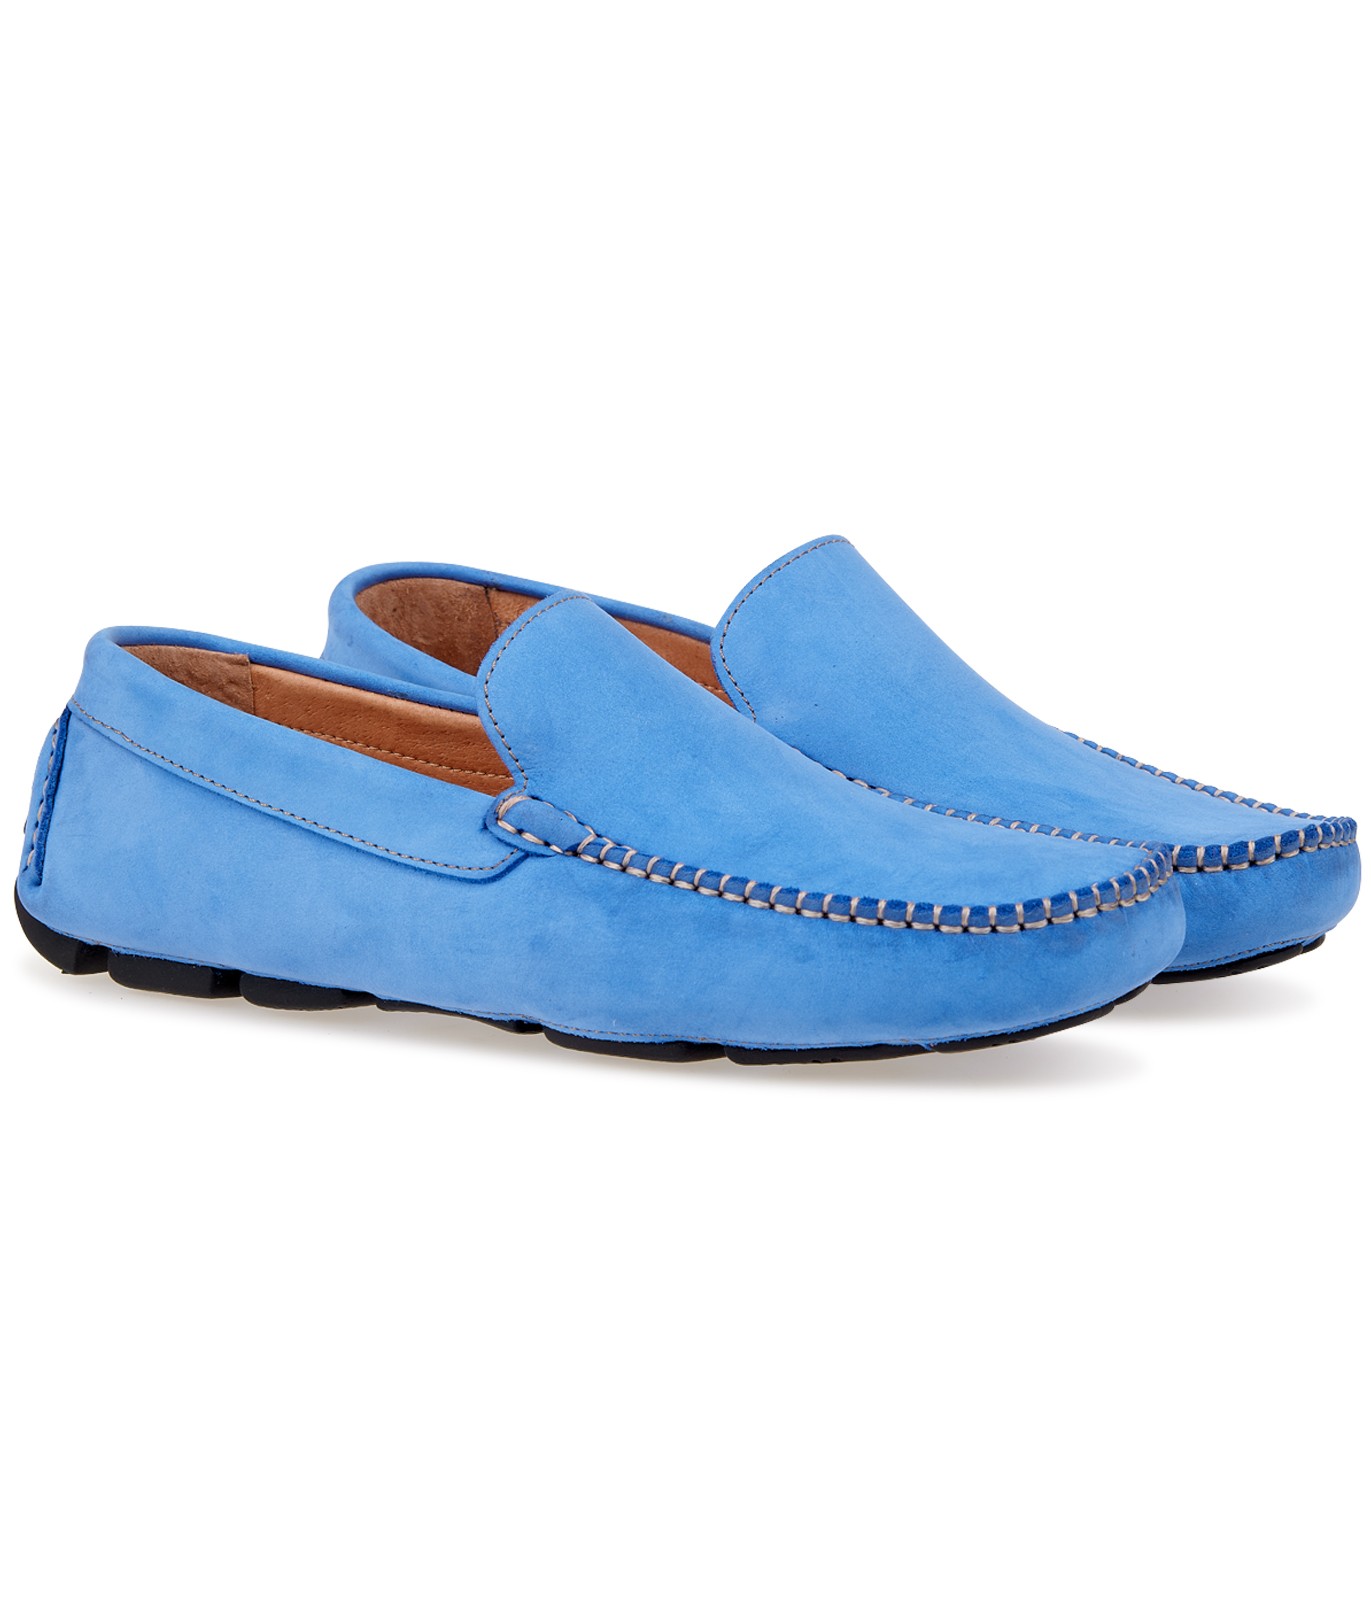 Janice At adskille pumpe Loafers in nubuck for mens | Quality brand Europann